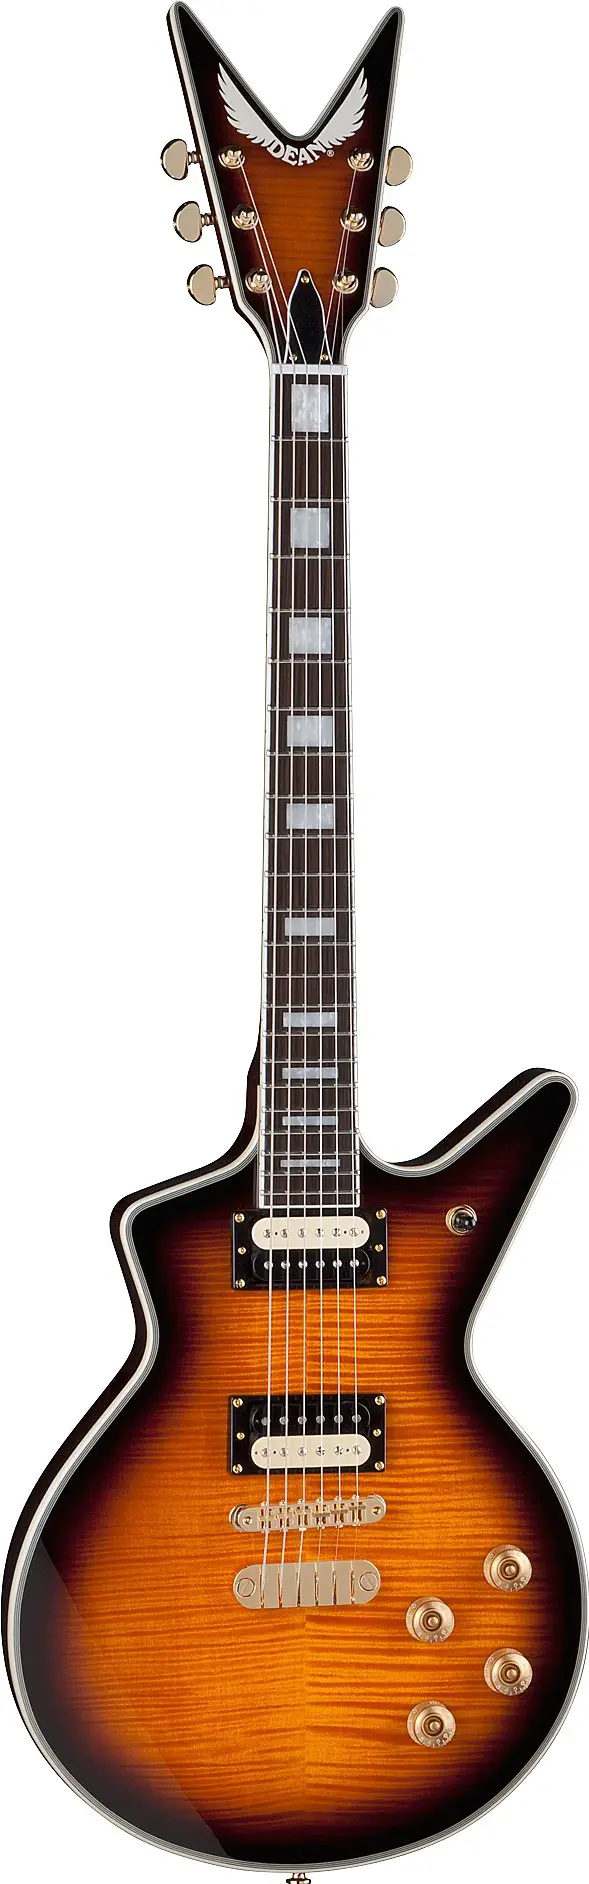 Cadillac 1980 Flame Top by Dean